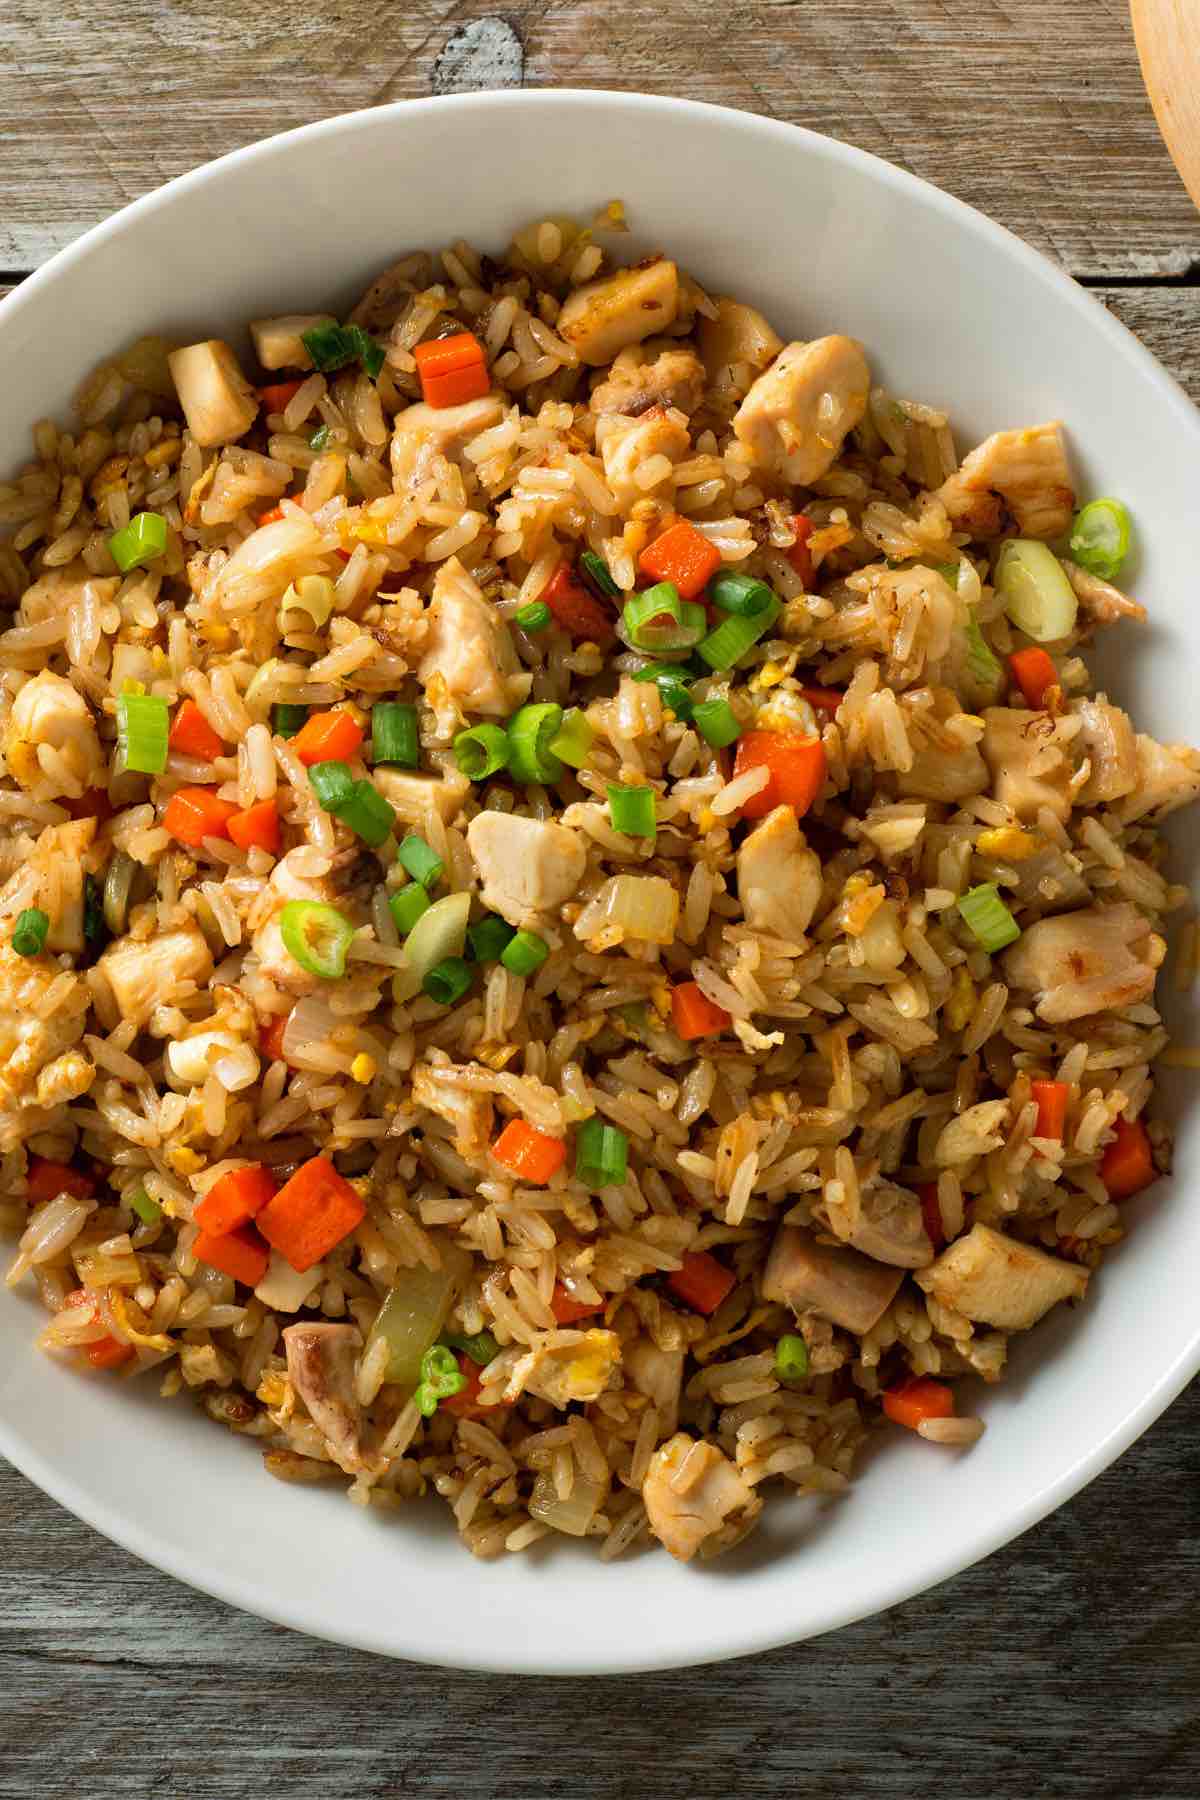 Tired of having the same rice dish over and over again? Or do you have a tupperware full of leftover rice that you just don’t know what to do with? Don’t fret! We've rounded up 17 quick and easy Leftover Rice Recipes for you to choose from!